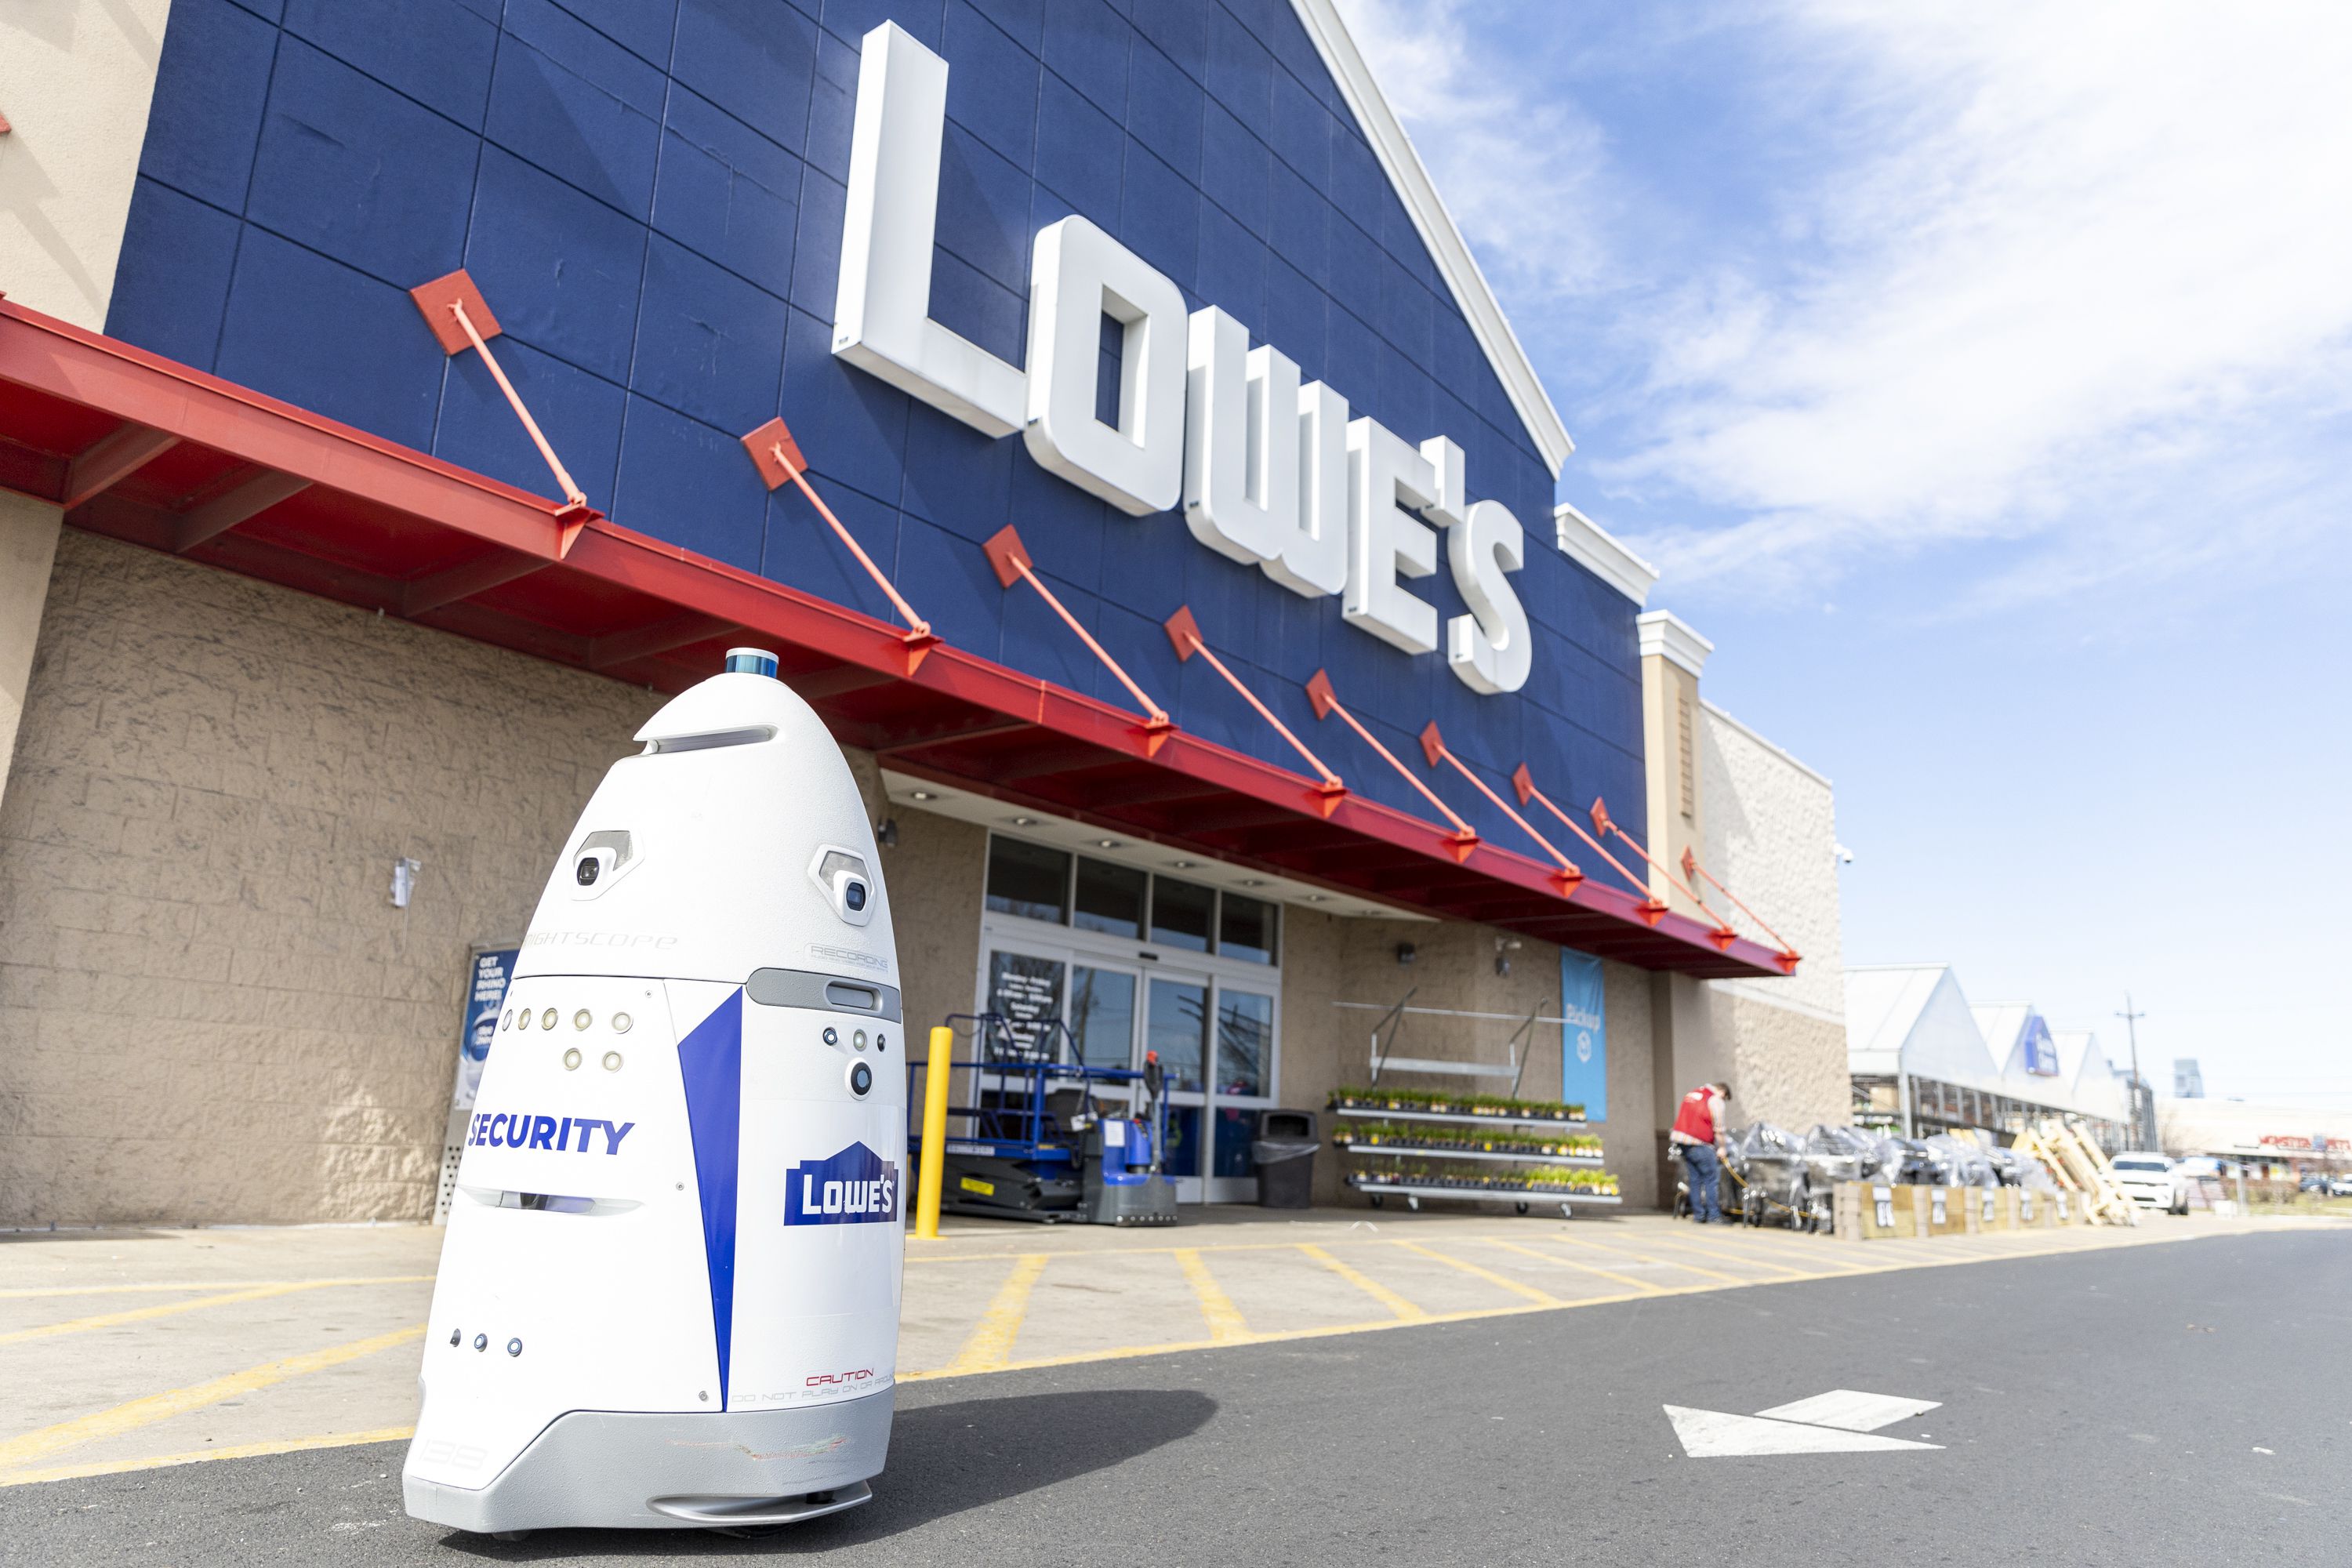 Part Time Jobs Lowes, Apply to Night Supervisor, Sales Associate